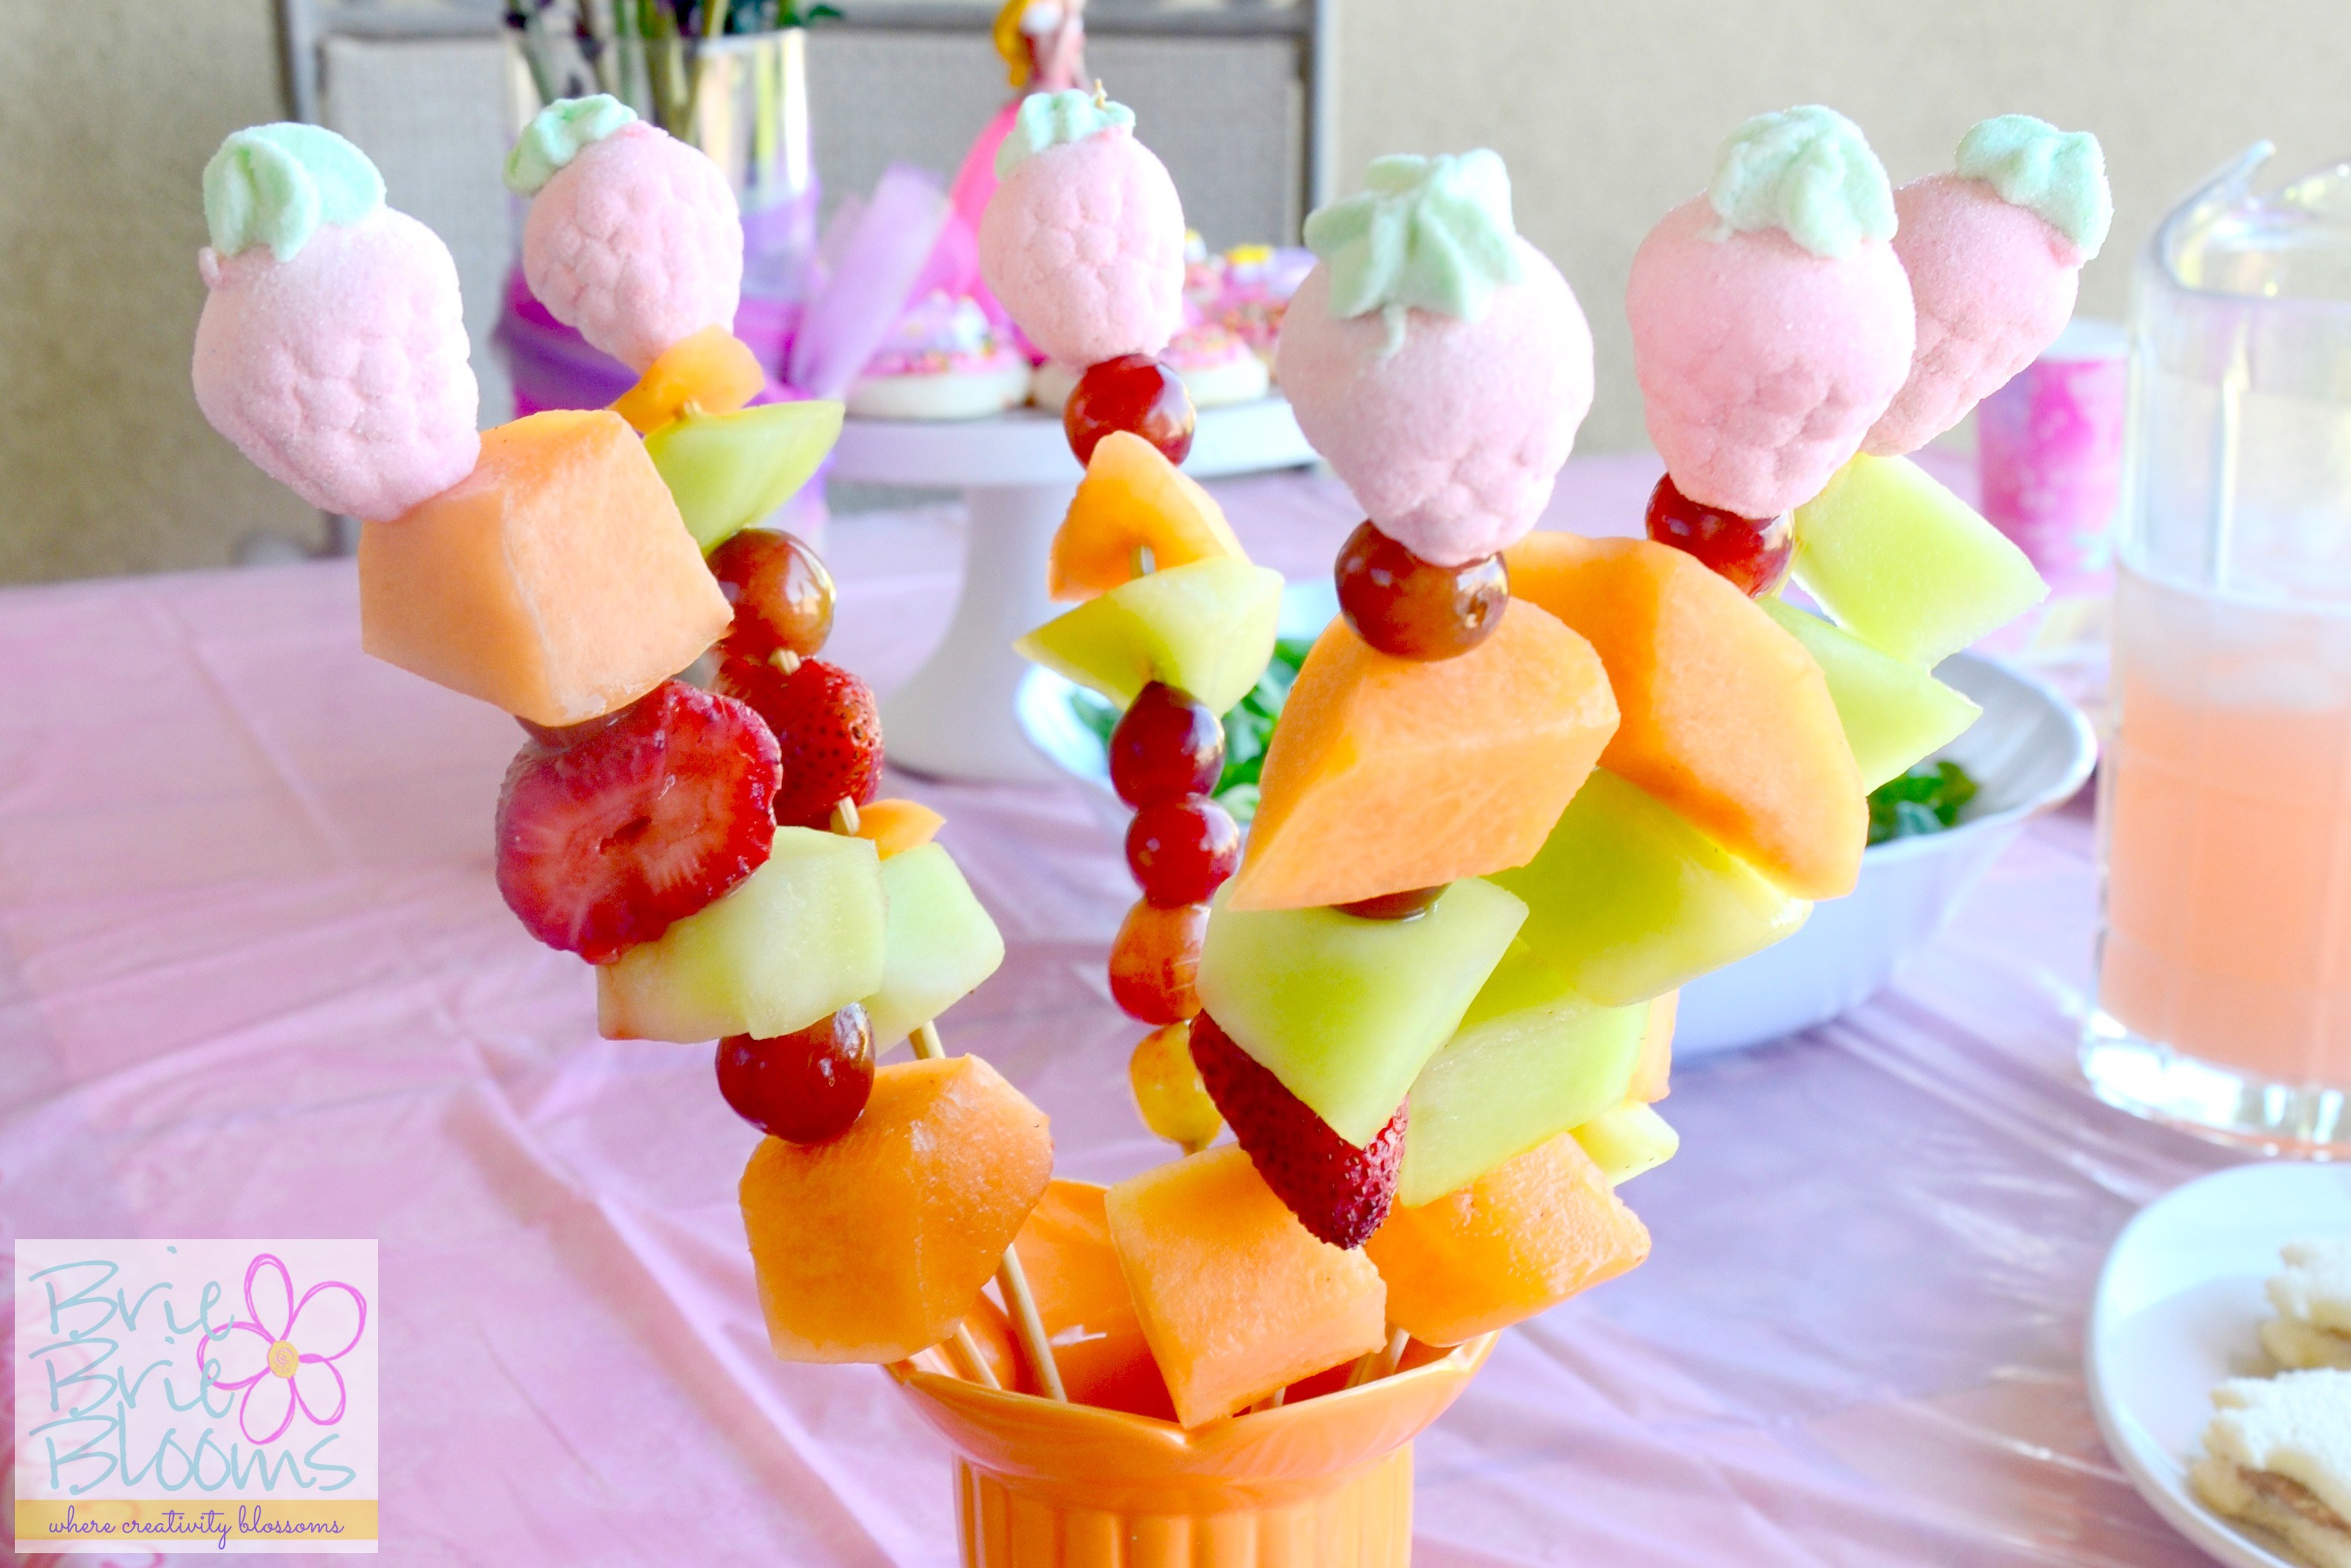 Fruit Kabobs topped with Chocolate Filled Strawberry Marshmallows at Disney Princess party